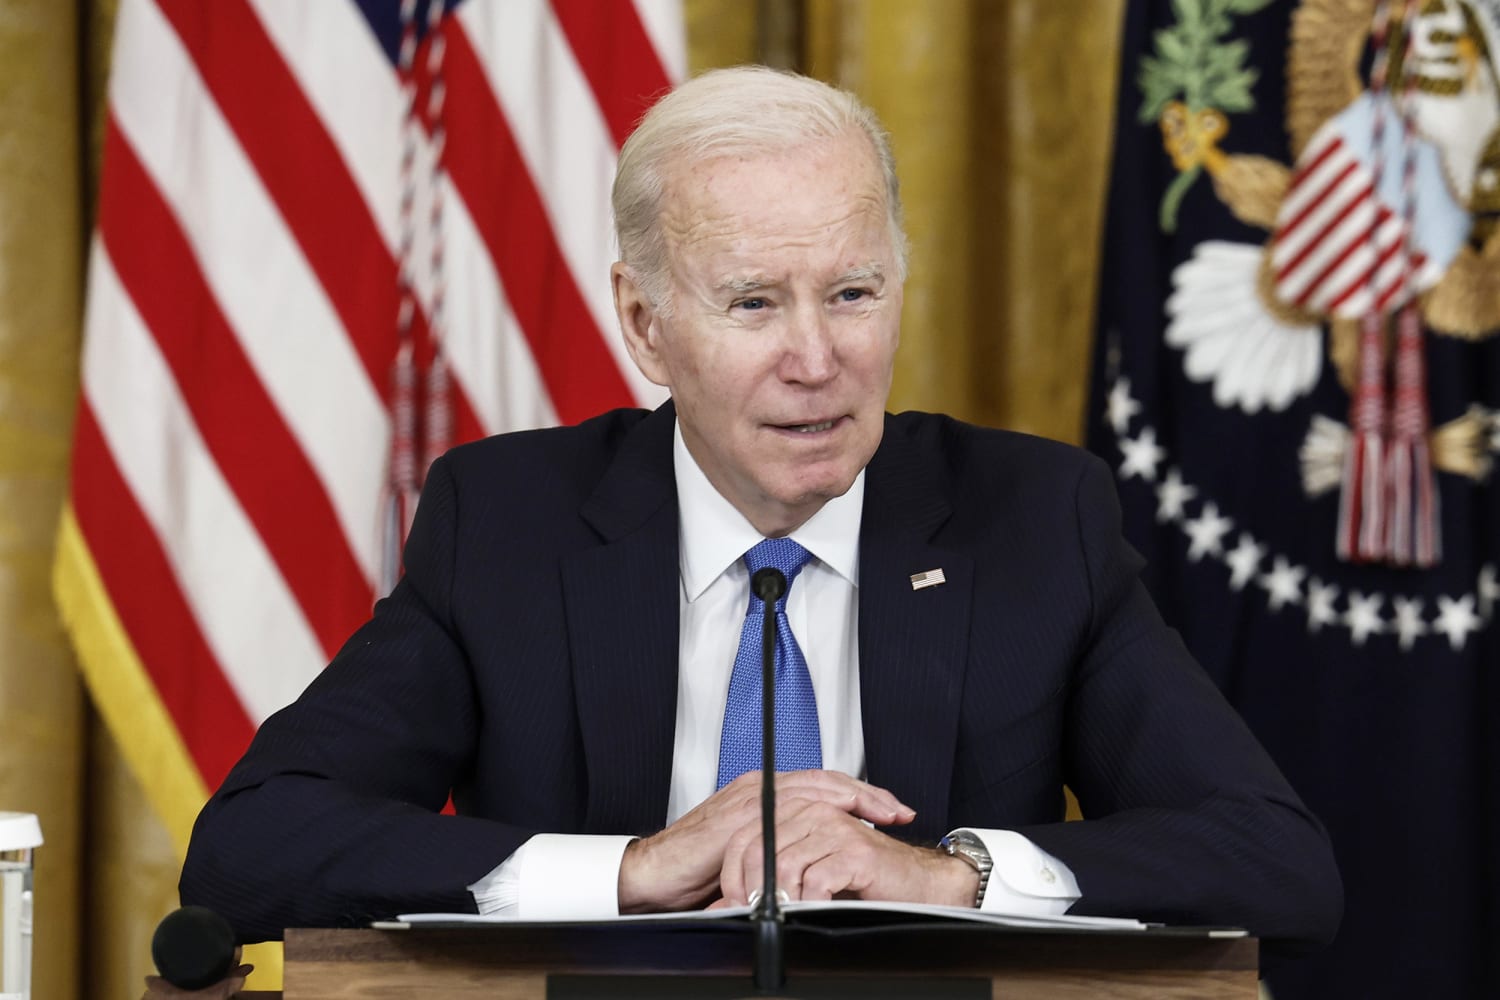 Biden to lay out childcare, home care policies in executive order